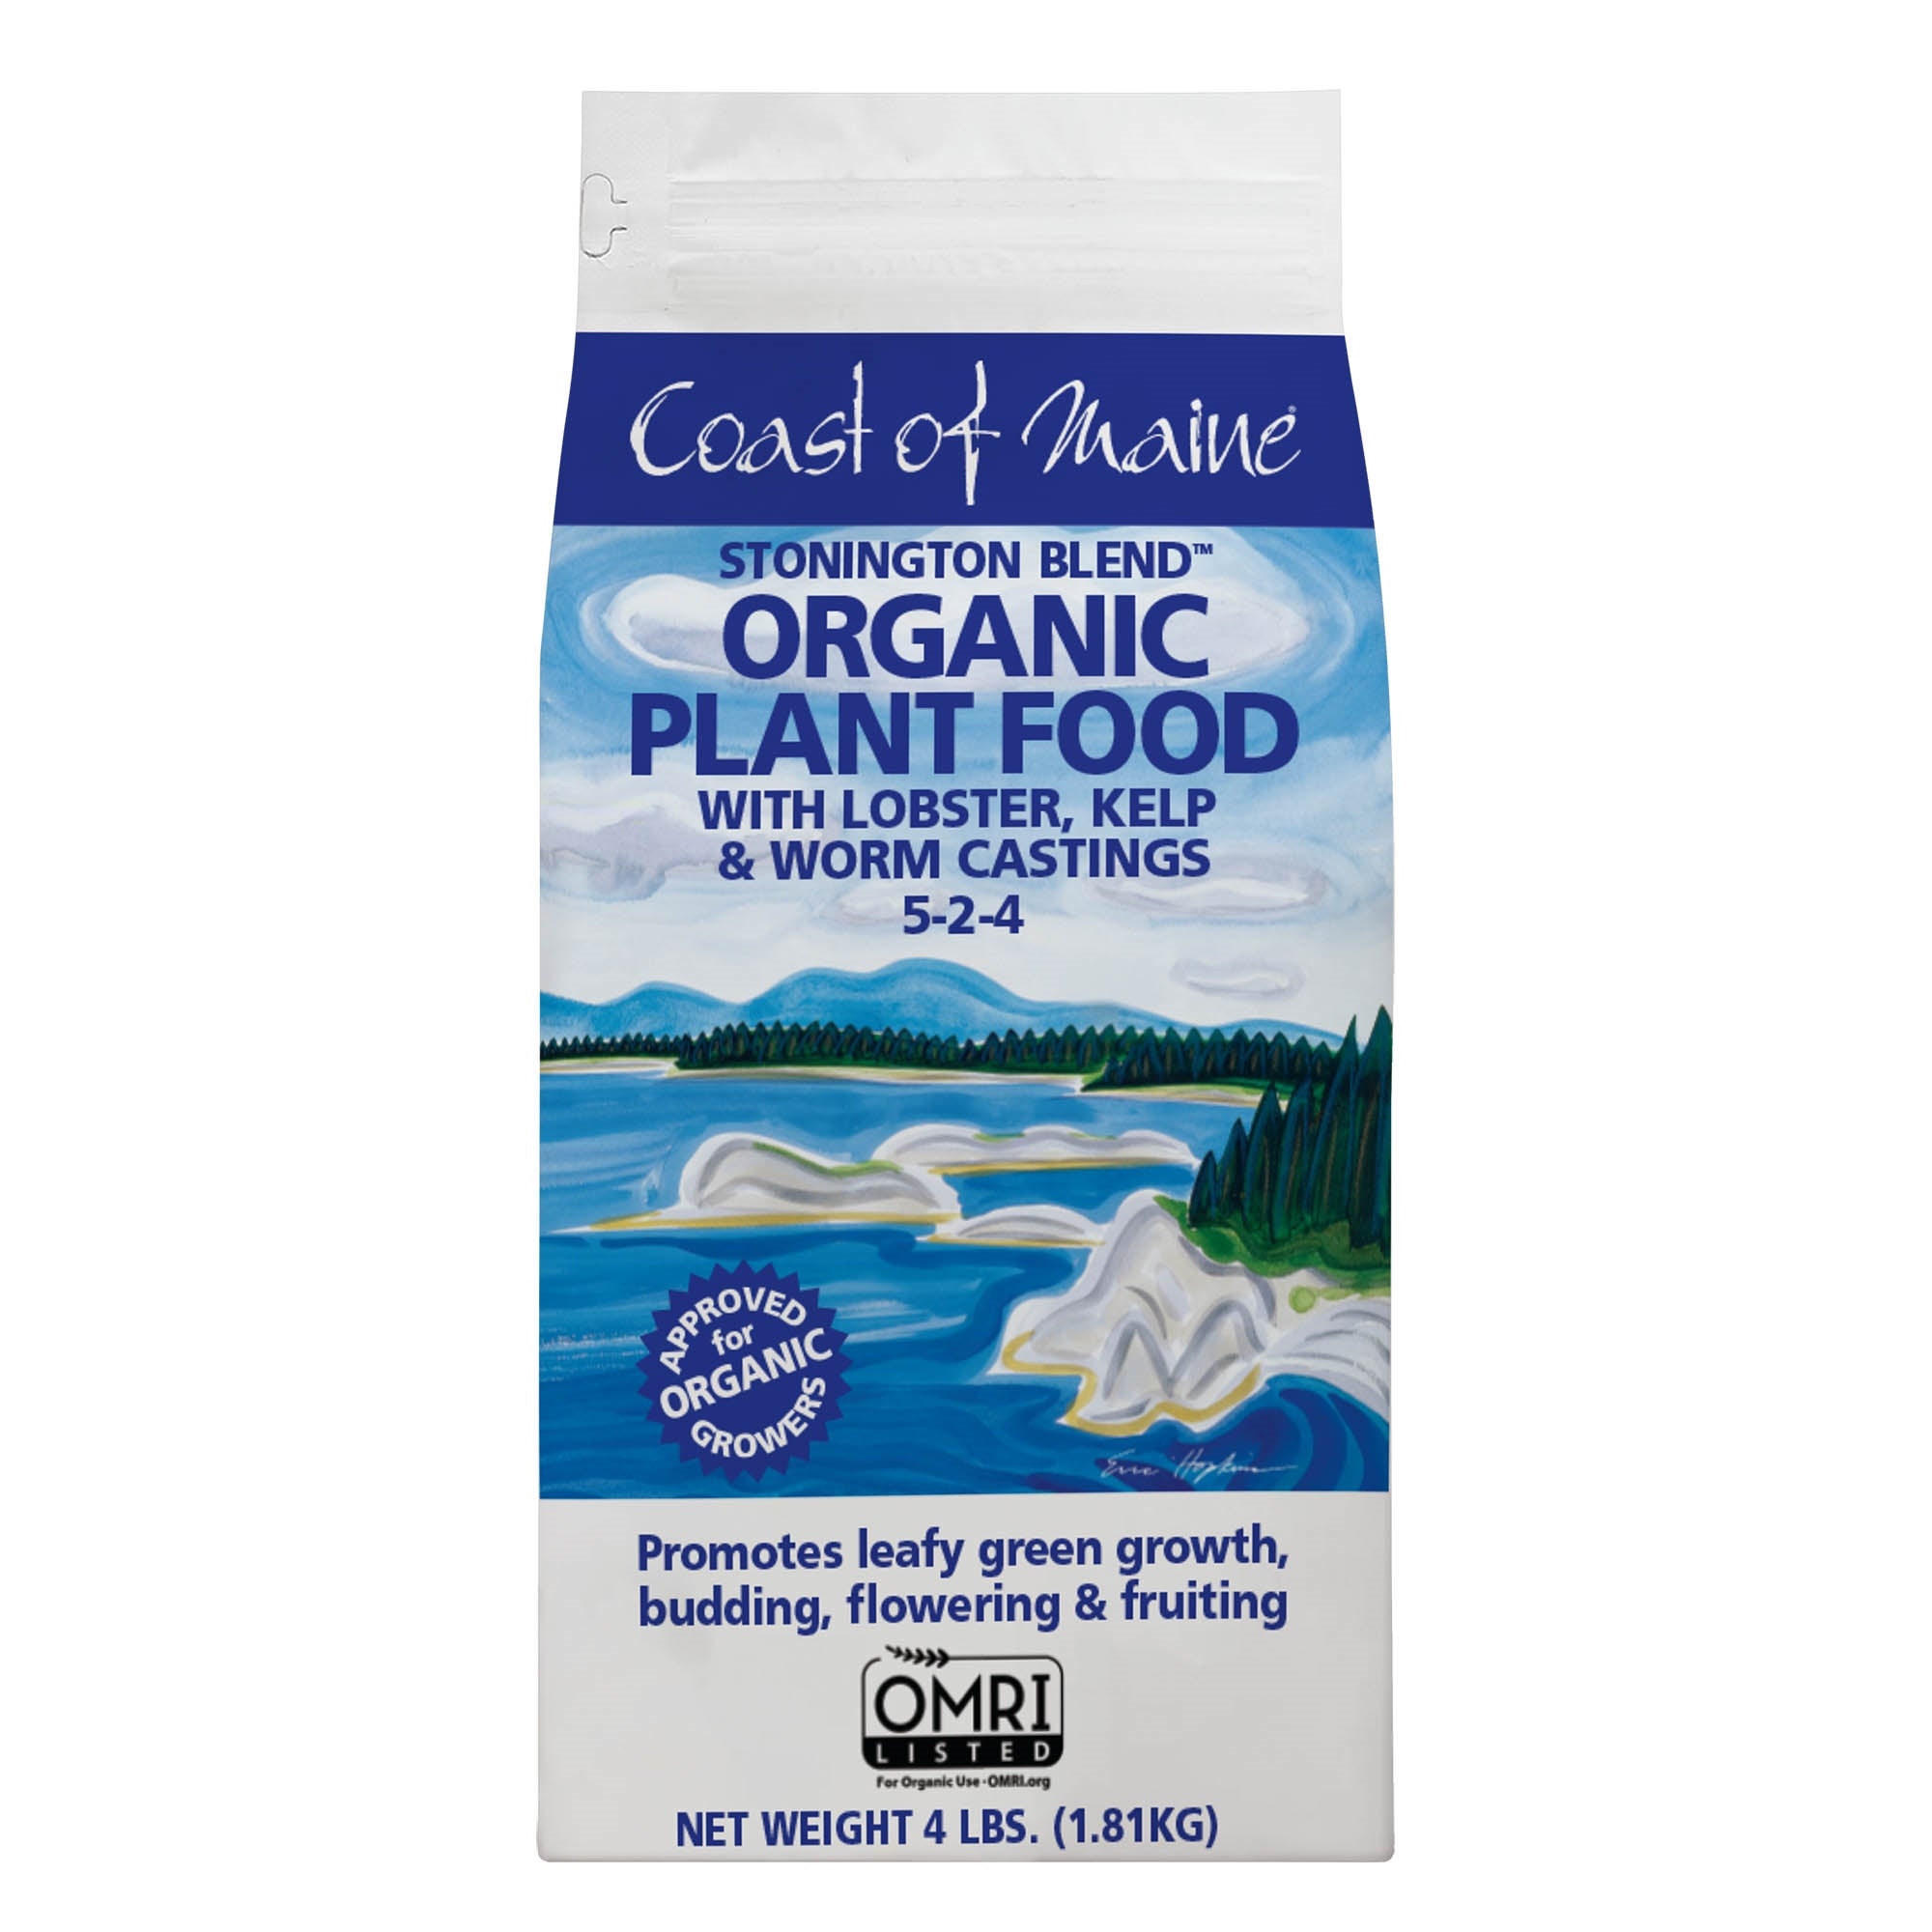 Coast of Maine Stonington Blend Organic Plant Food with Lobster, Kelp and Worm Castings, 4lb